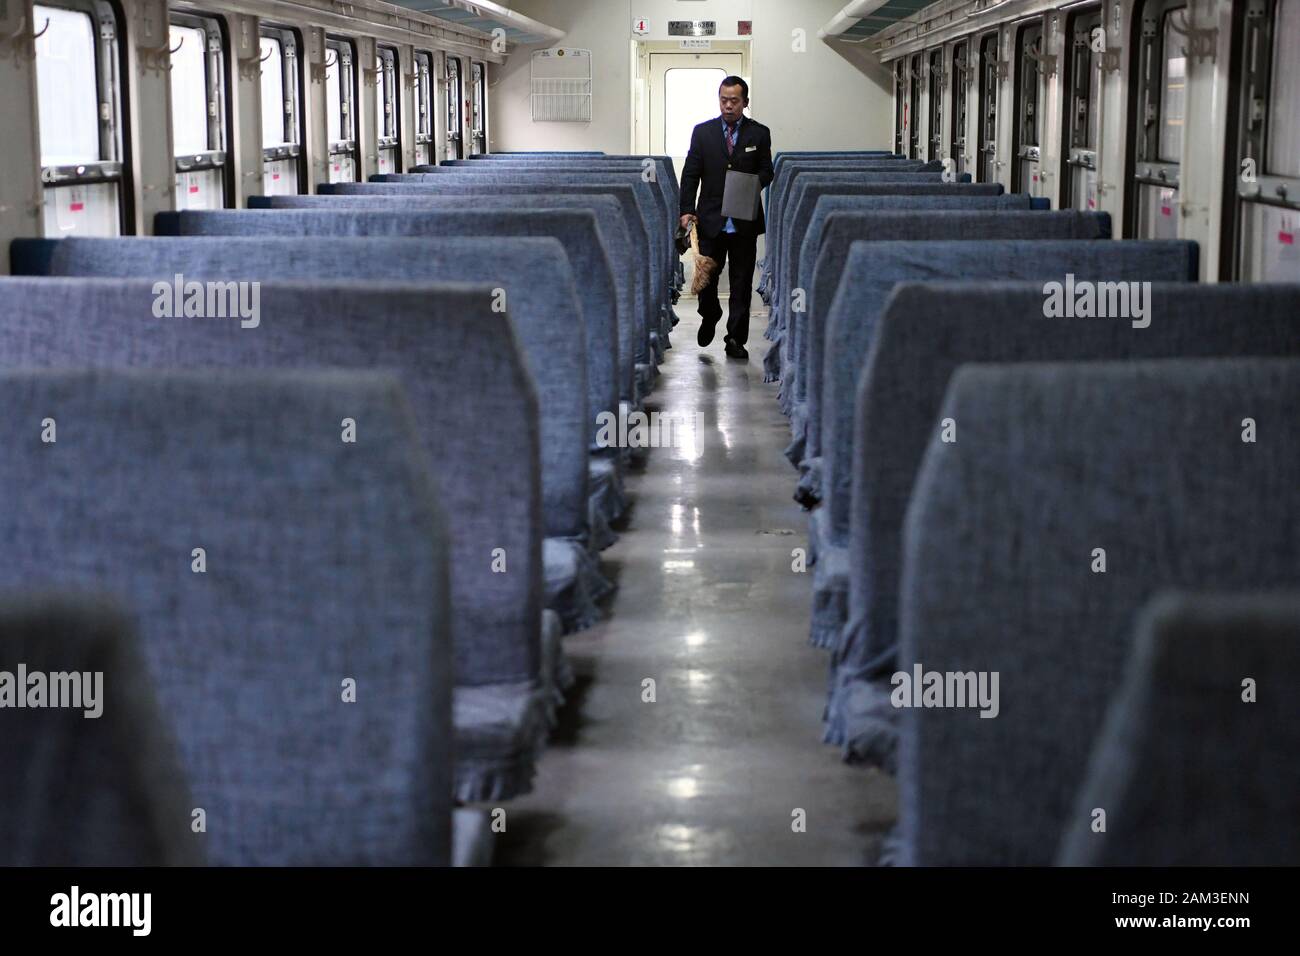 (200111) -- LANZHOU, Jan. 11, 2020 (Xinhua) -- Train conductor Sun Guofan does cleaning on the train No. 7505 at the Lanzhou Railway Station in Lanzhou, capital of northwest China's Gansu Province, Jan. 10, 2020. The train No. 7505, which travels from Lanzhou to Wuwei, is a four-carriage ordinary train. The train, which links more than a dozen small stations between Lanzhou and Wuwei, runs 290 kilometers in 5 hours and 27 minutes. The full fare is 18.5 yuan (about 2.7 U.S. dollars), with the lowest fare being 1 yuan. It has been running for nearly 40 years since the 1980s, carrying nearly 10 m Stock Photo